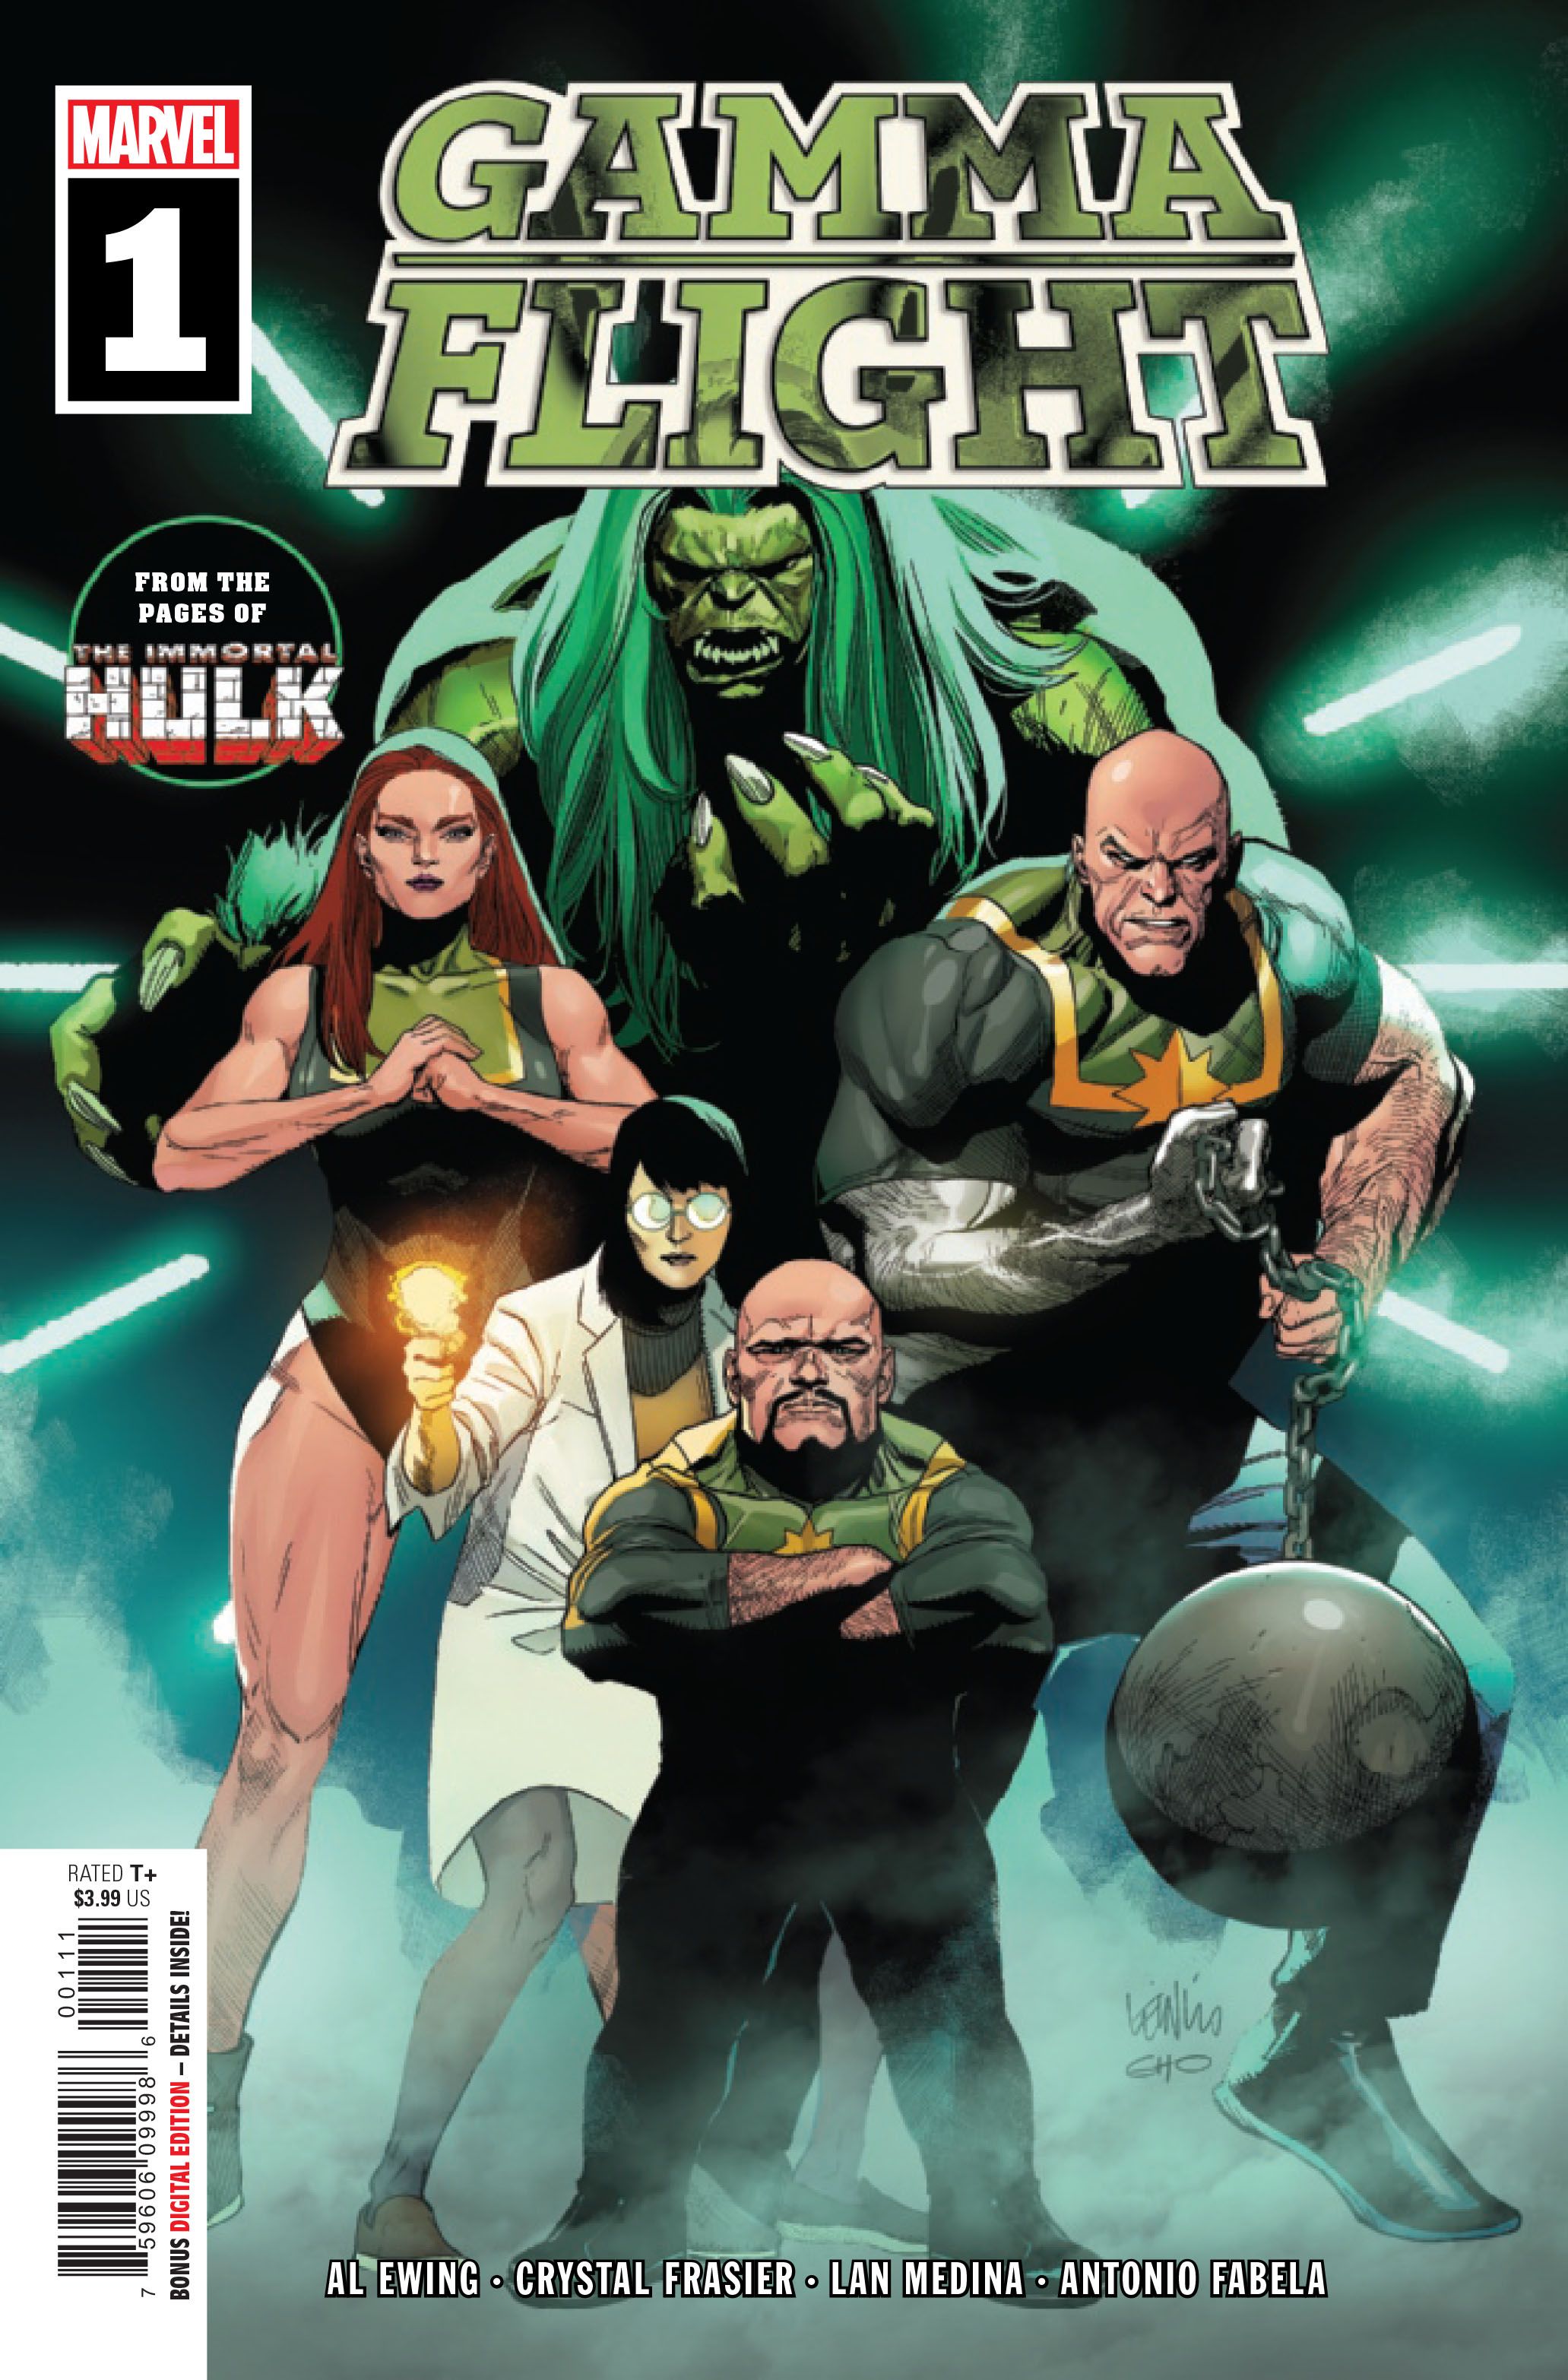 Puck, Titania, Doc Sasquatch and the Absorbing Man on the cover of Gamma Flight #1